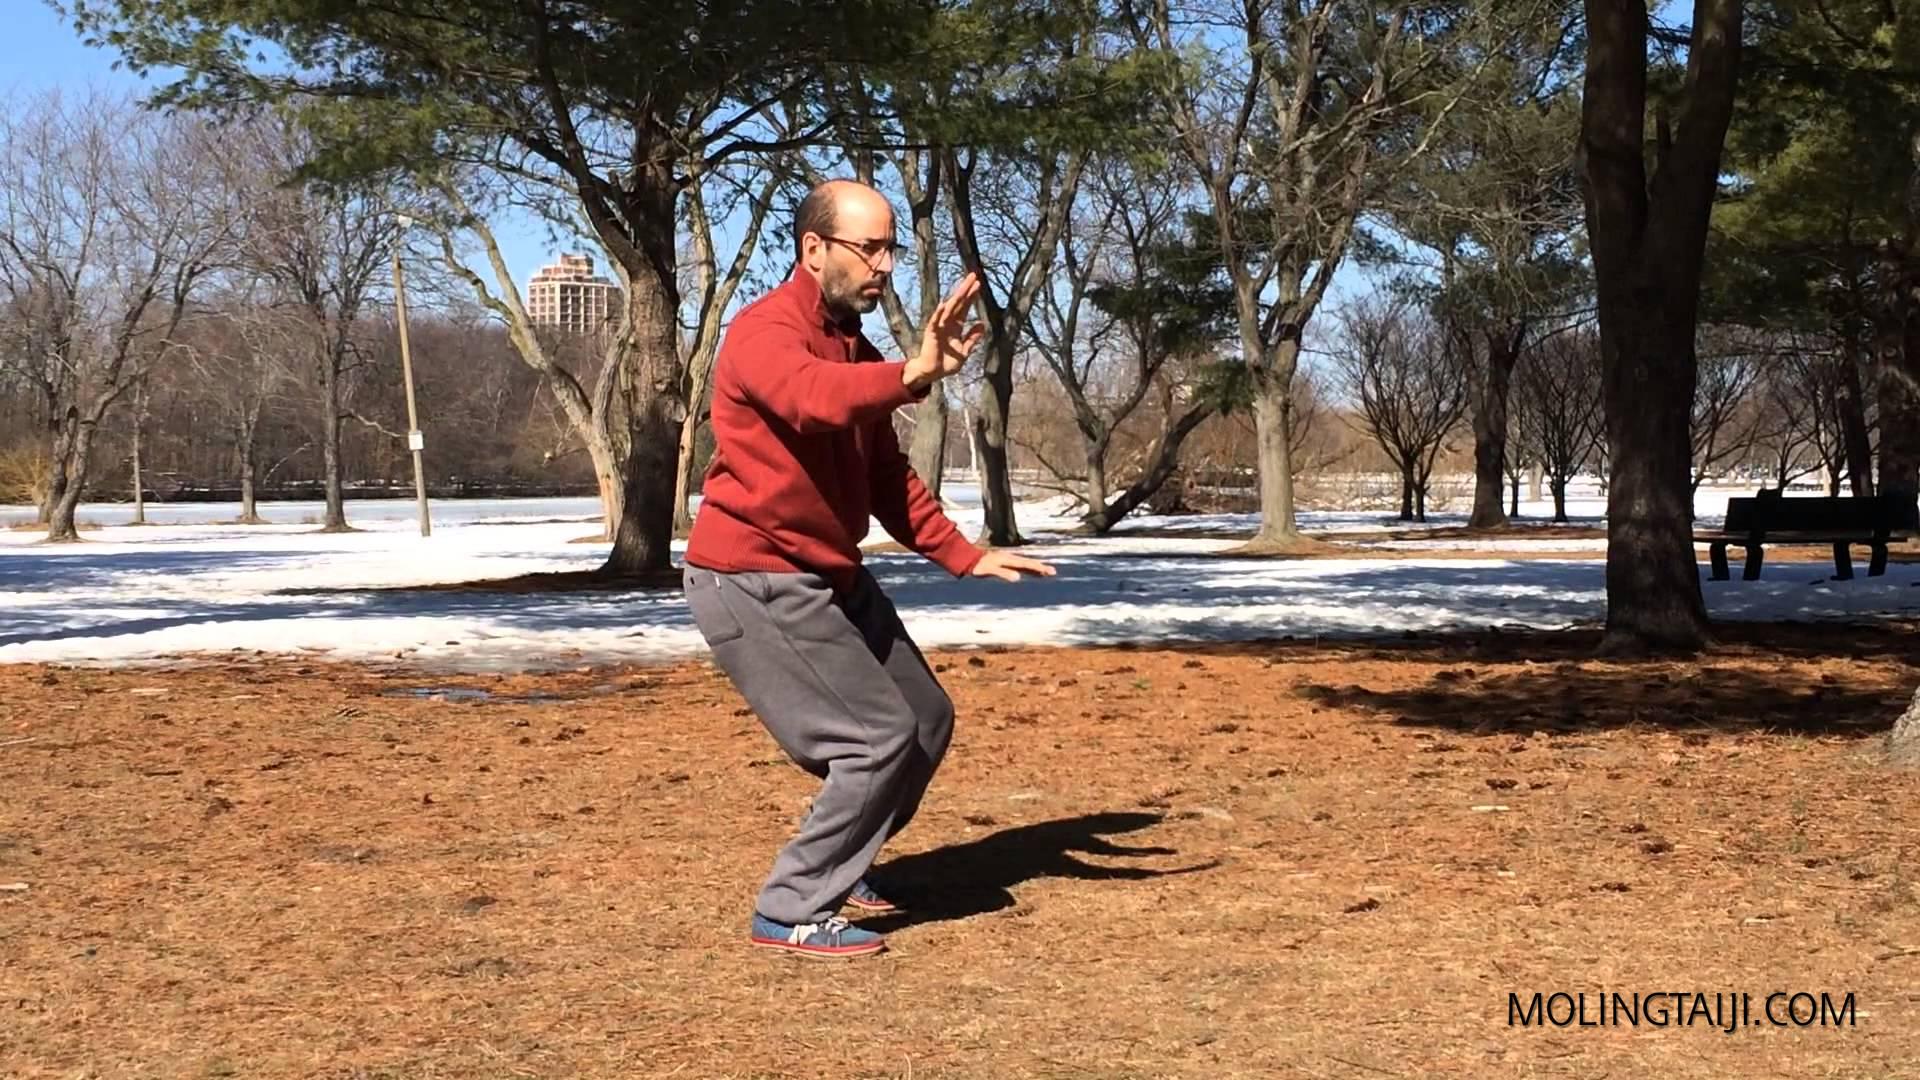 Two slightly different feelings of Chen Taijiquan Yilu as the seasons changed